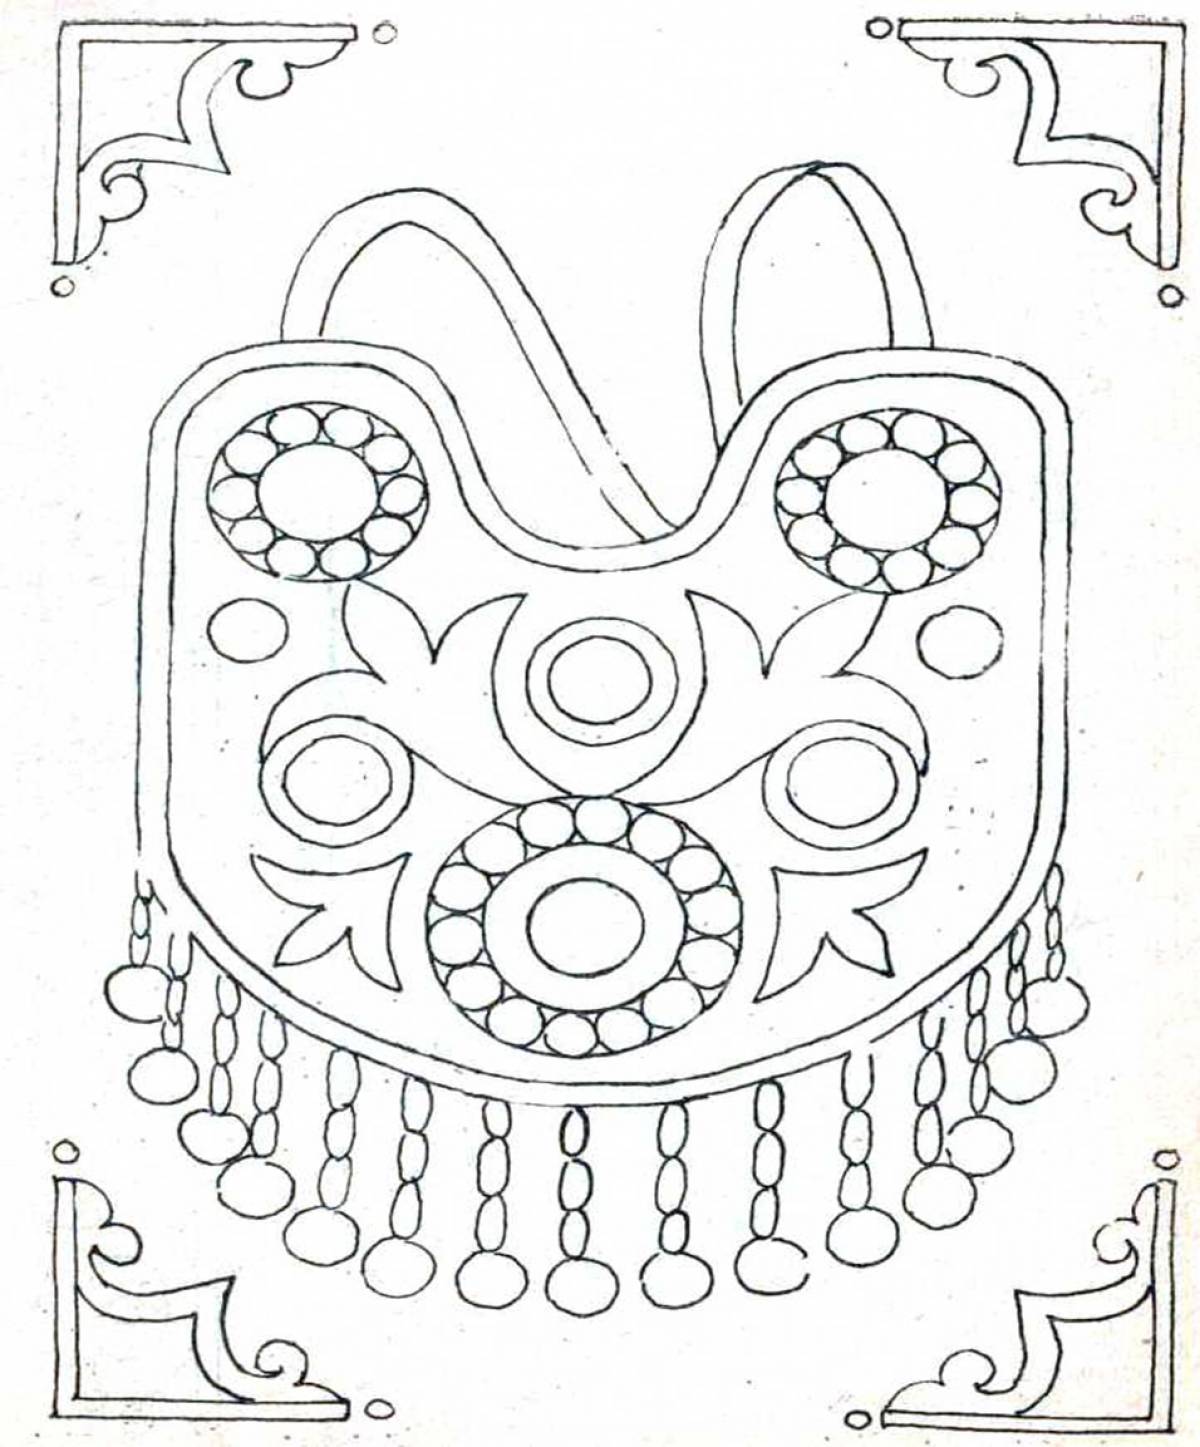 Merry Tatar ornament coloring for children